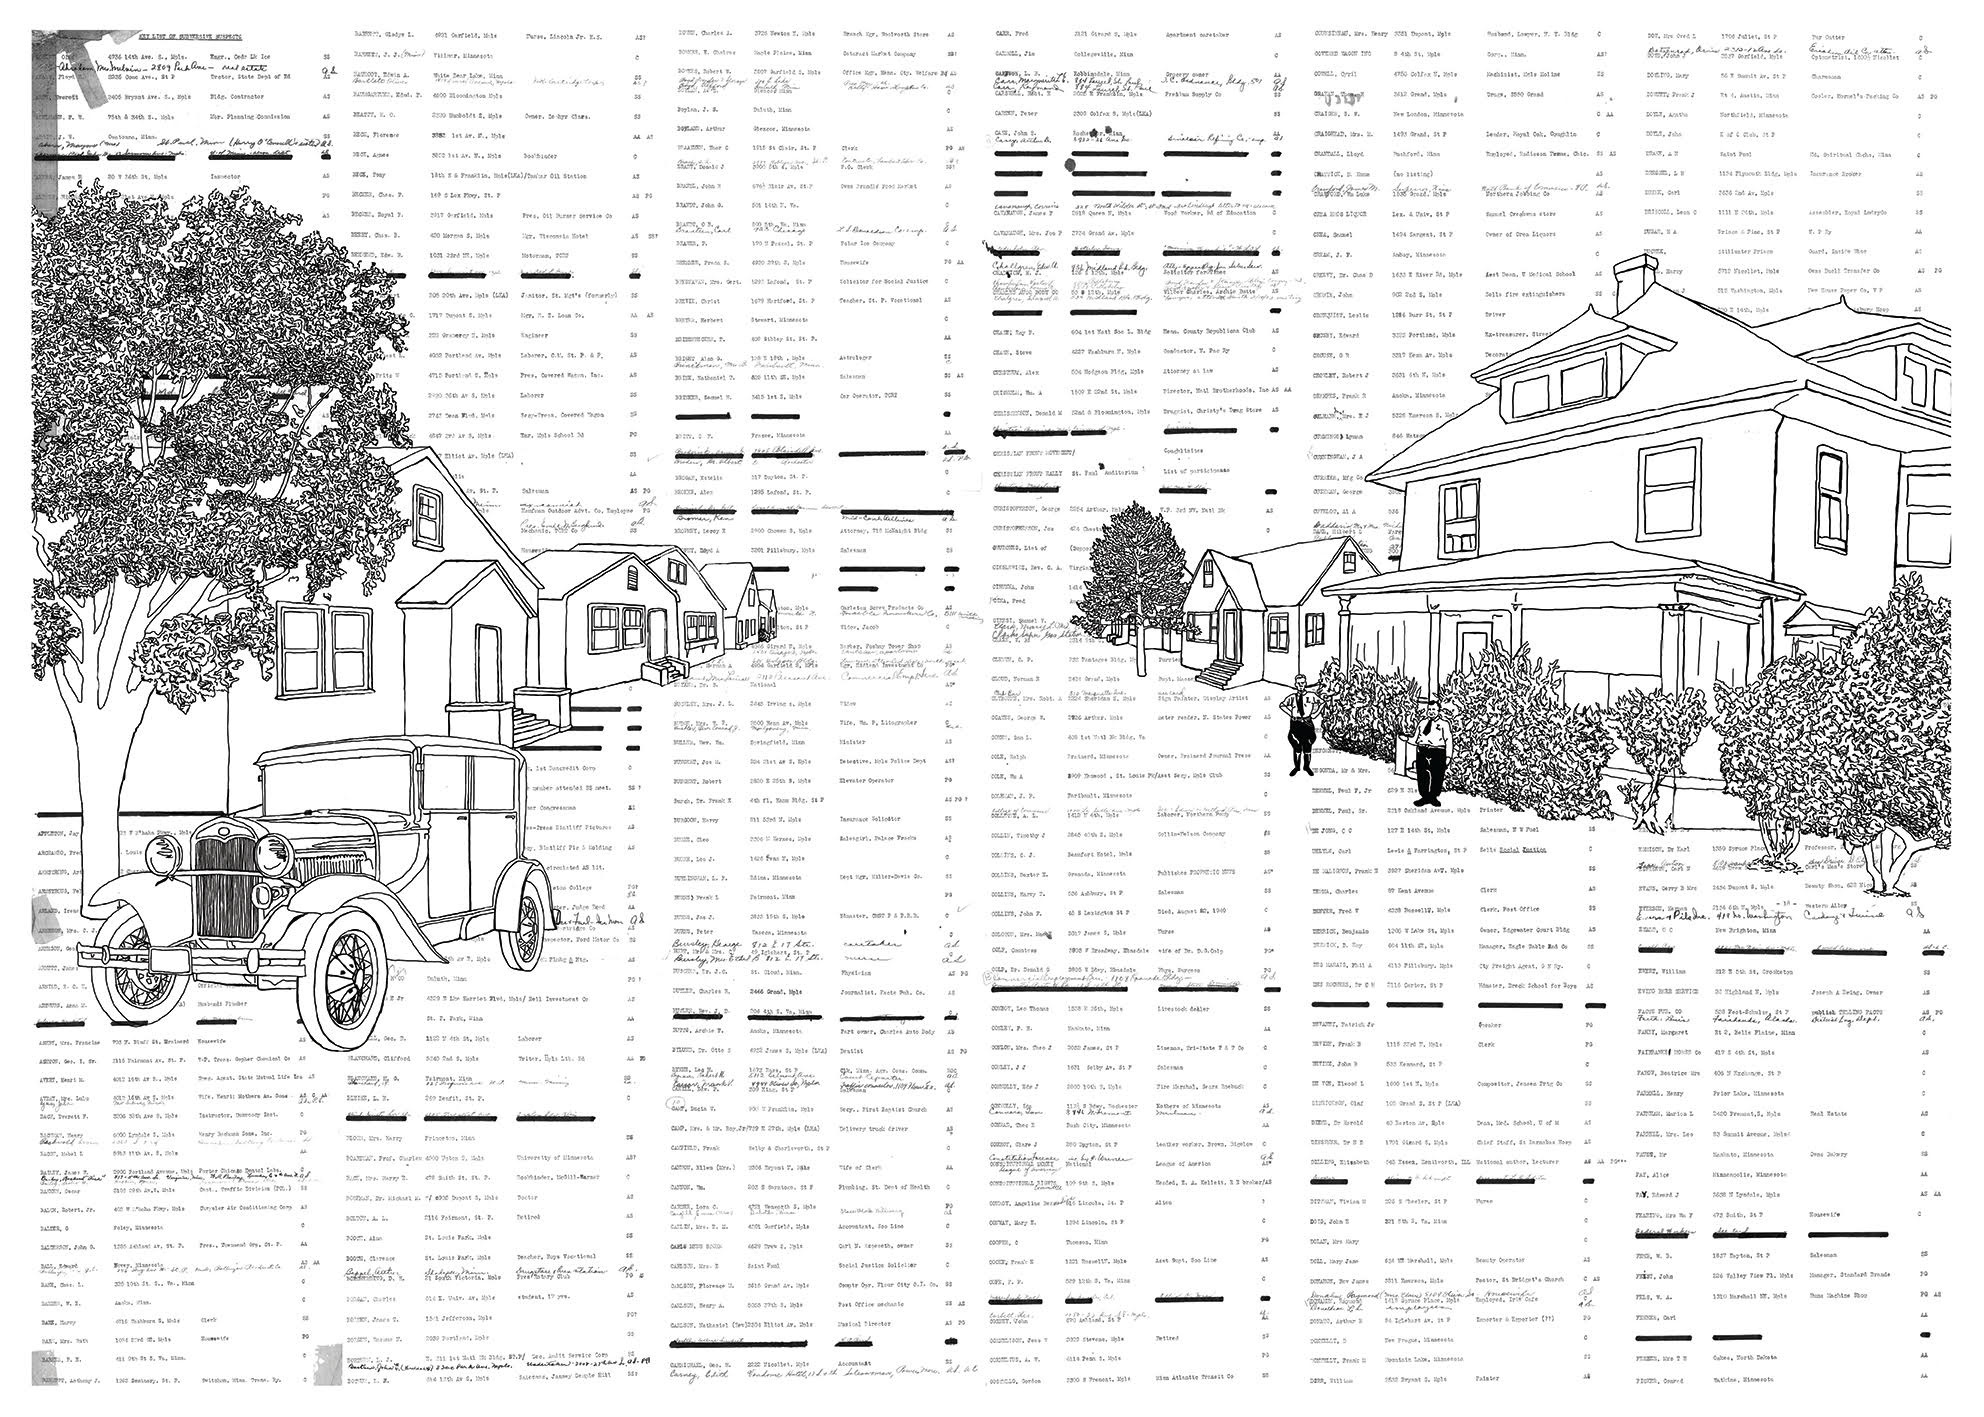 Residential road drawing with text overlayed 